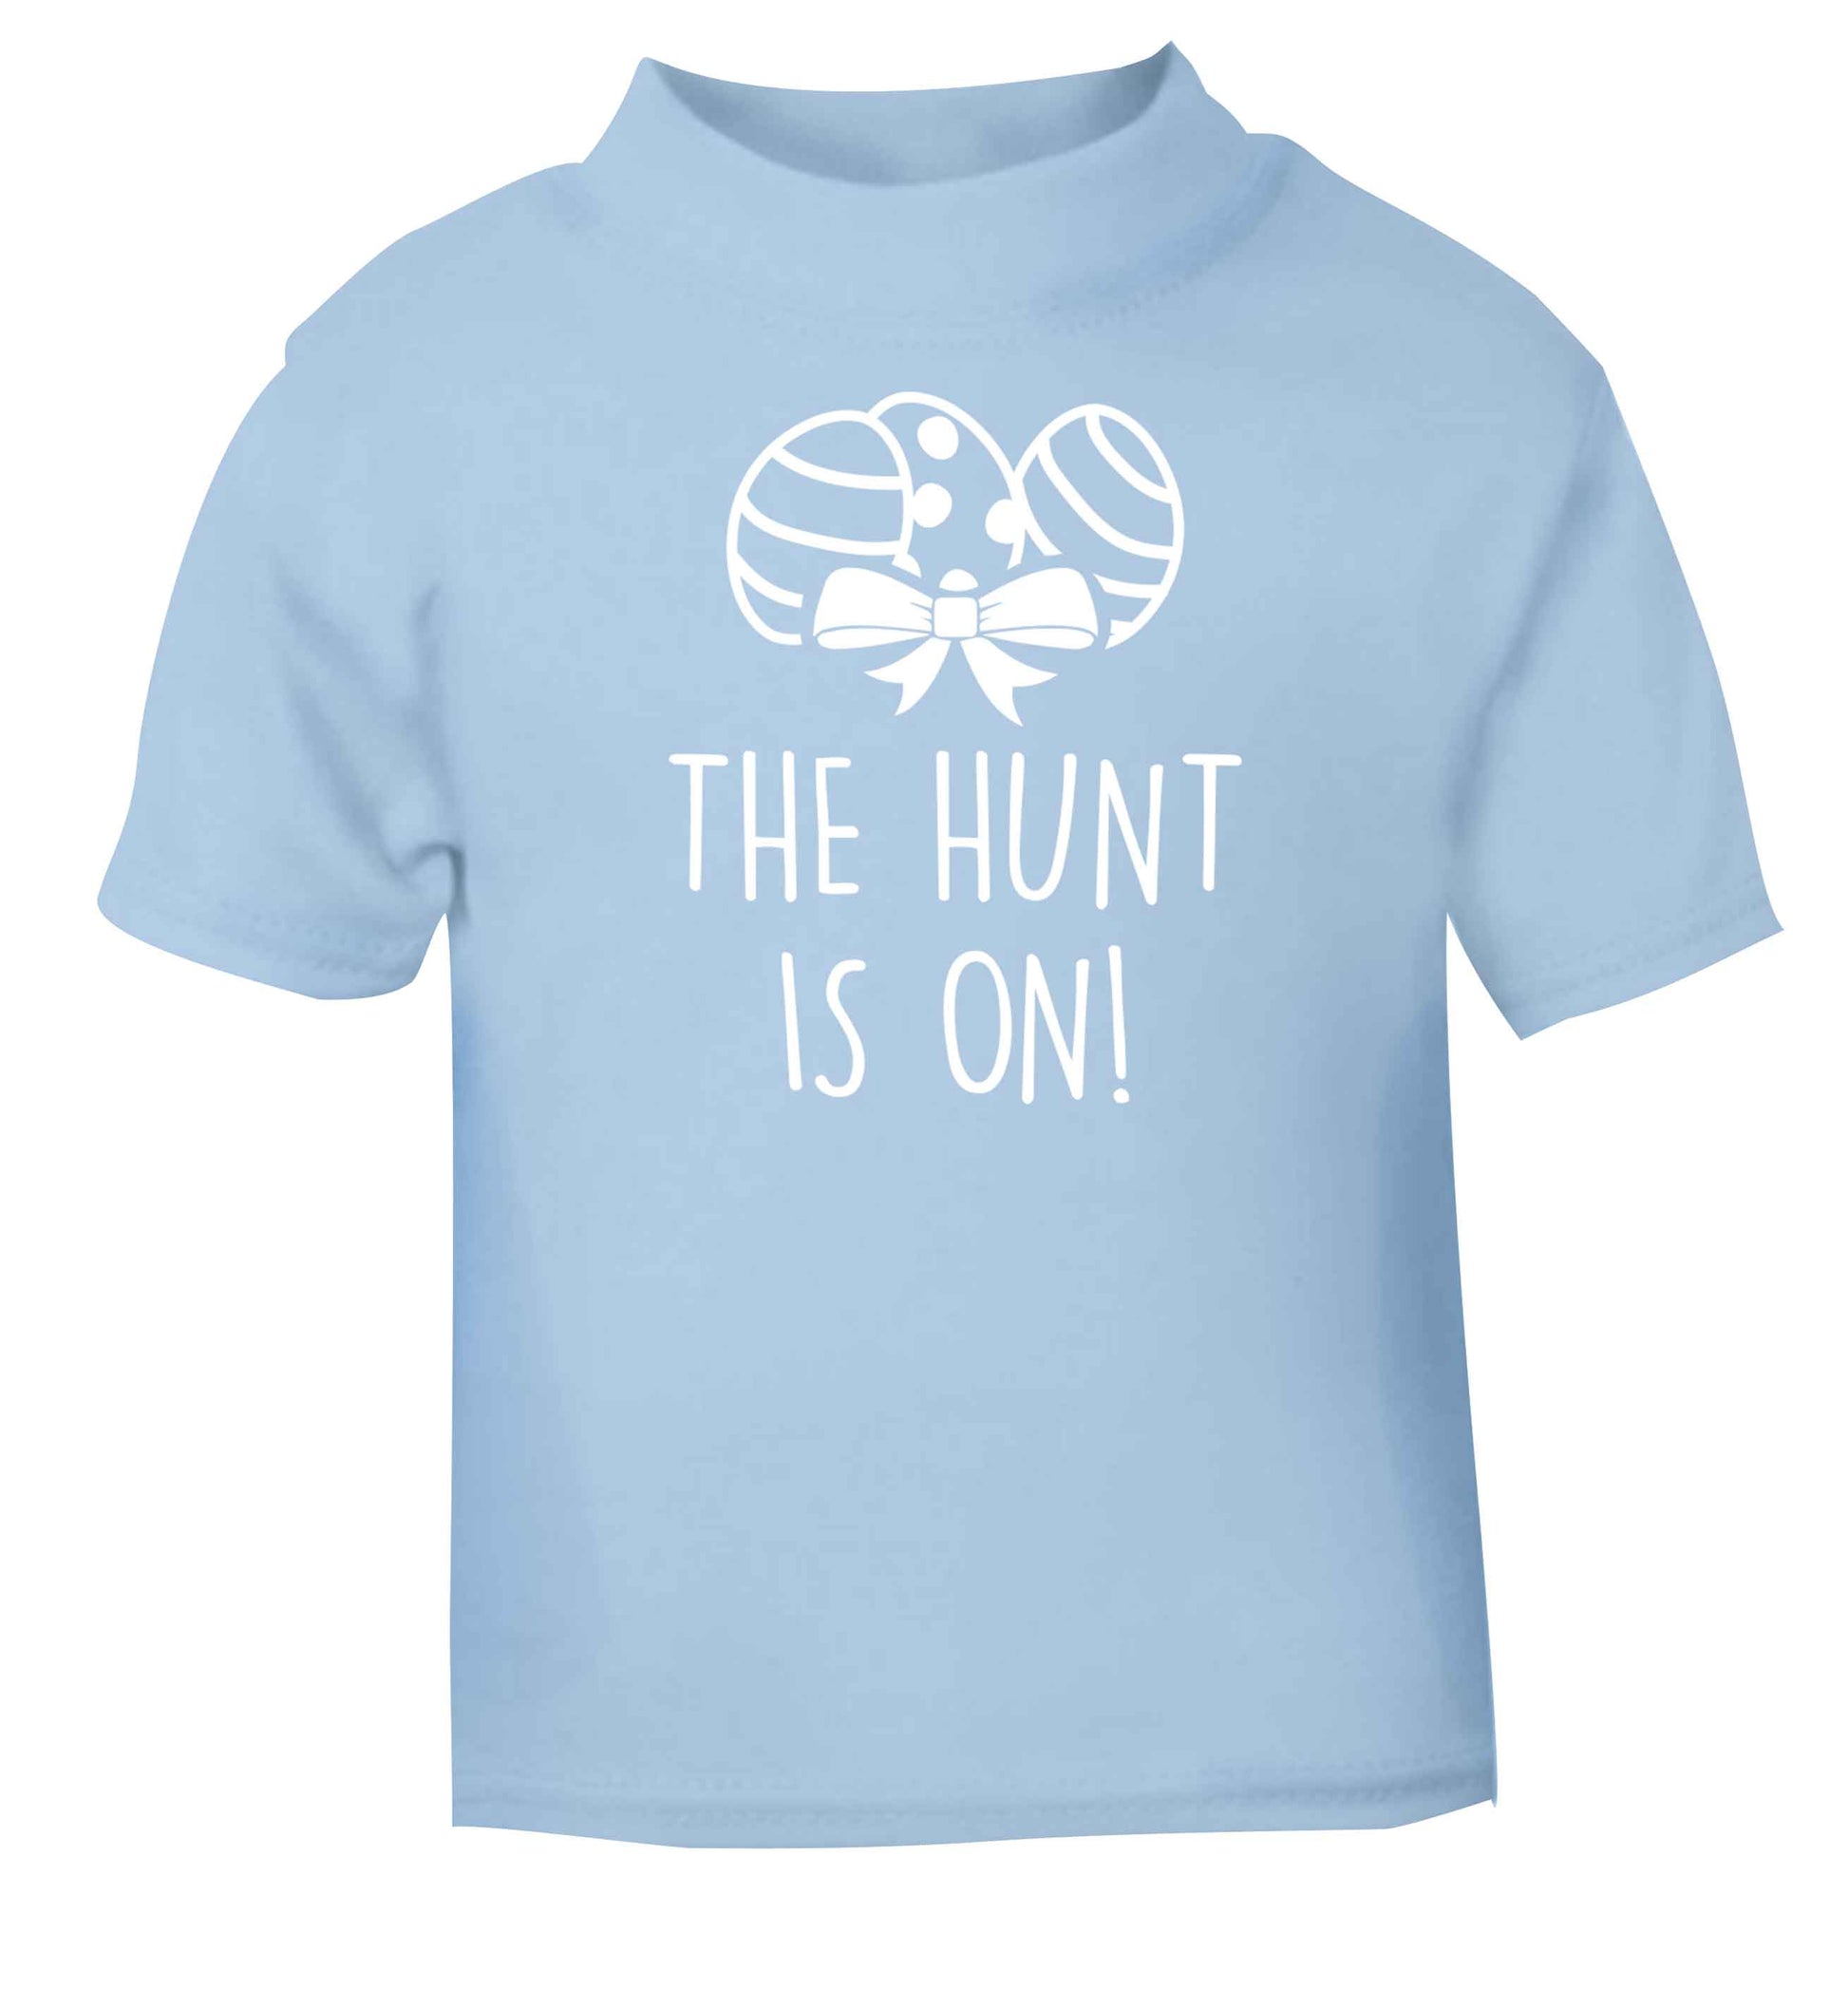 The hunt is on light blue baby toddler Tshirt 2 Years